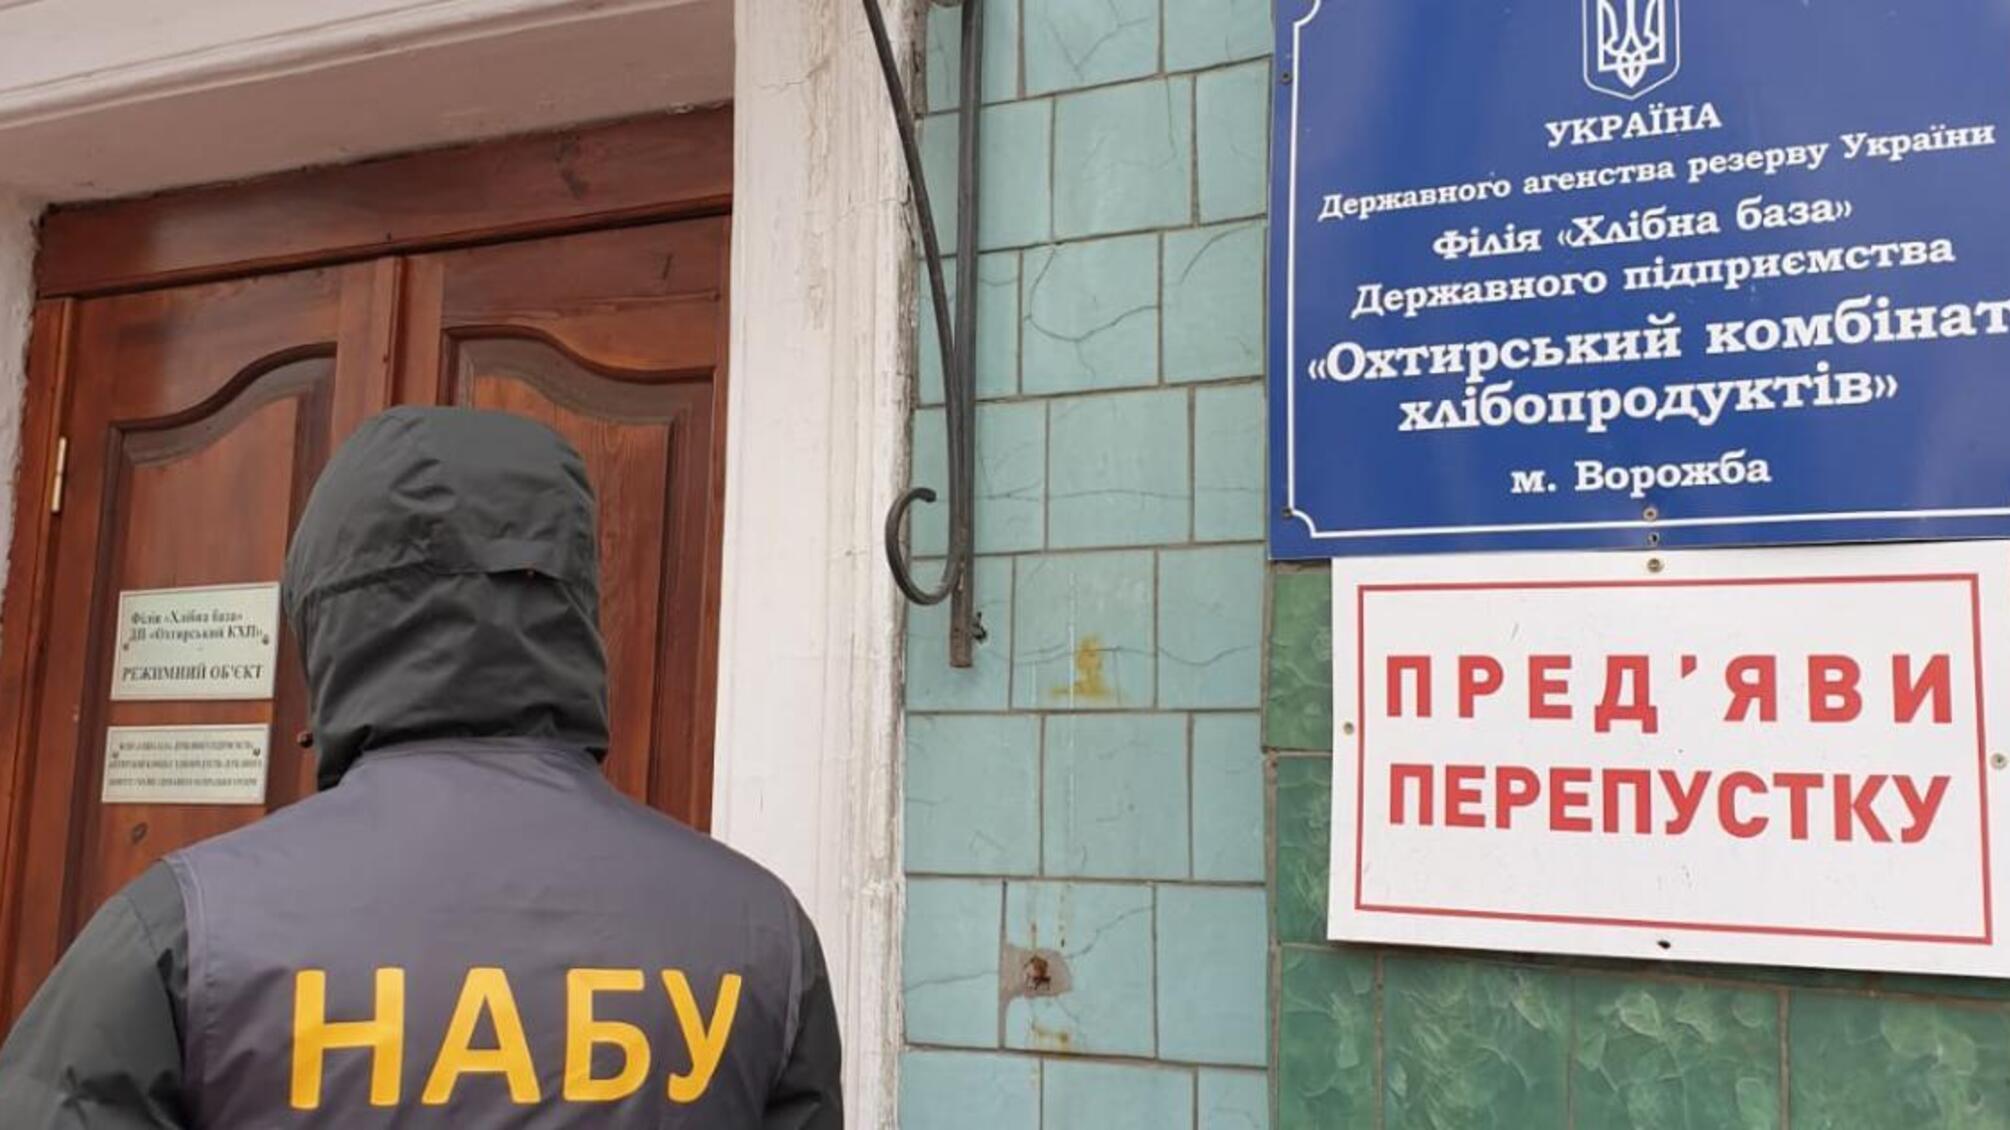 Head  of the Branch of the State Reserve Agency is suspected of UAH 2.8 million funds embezzlement